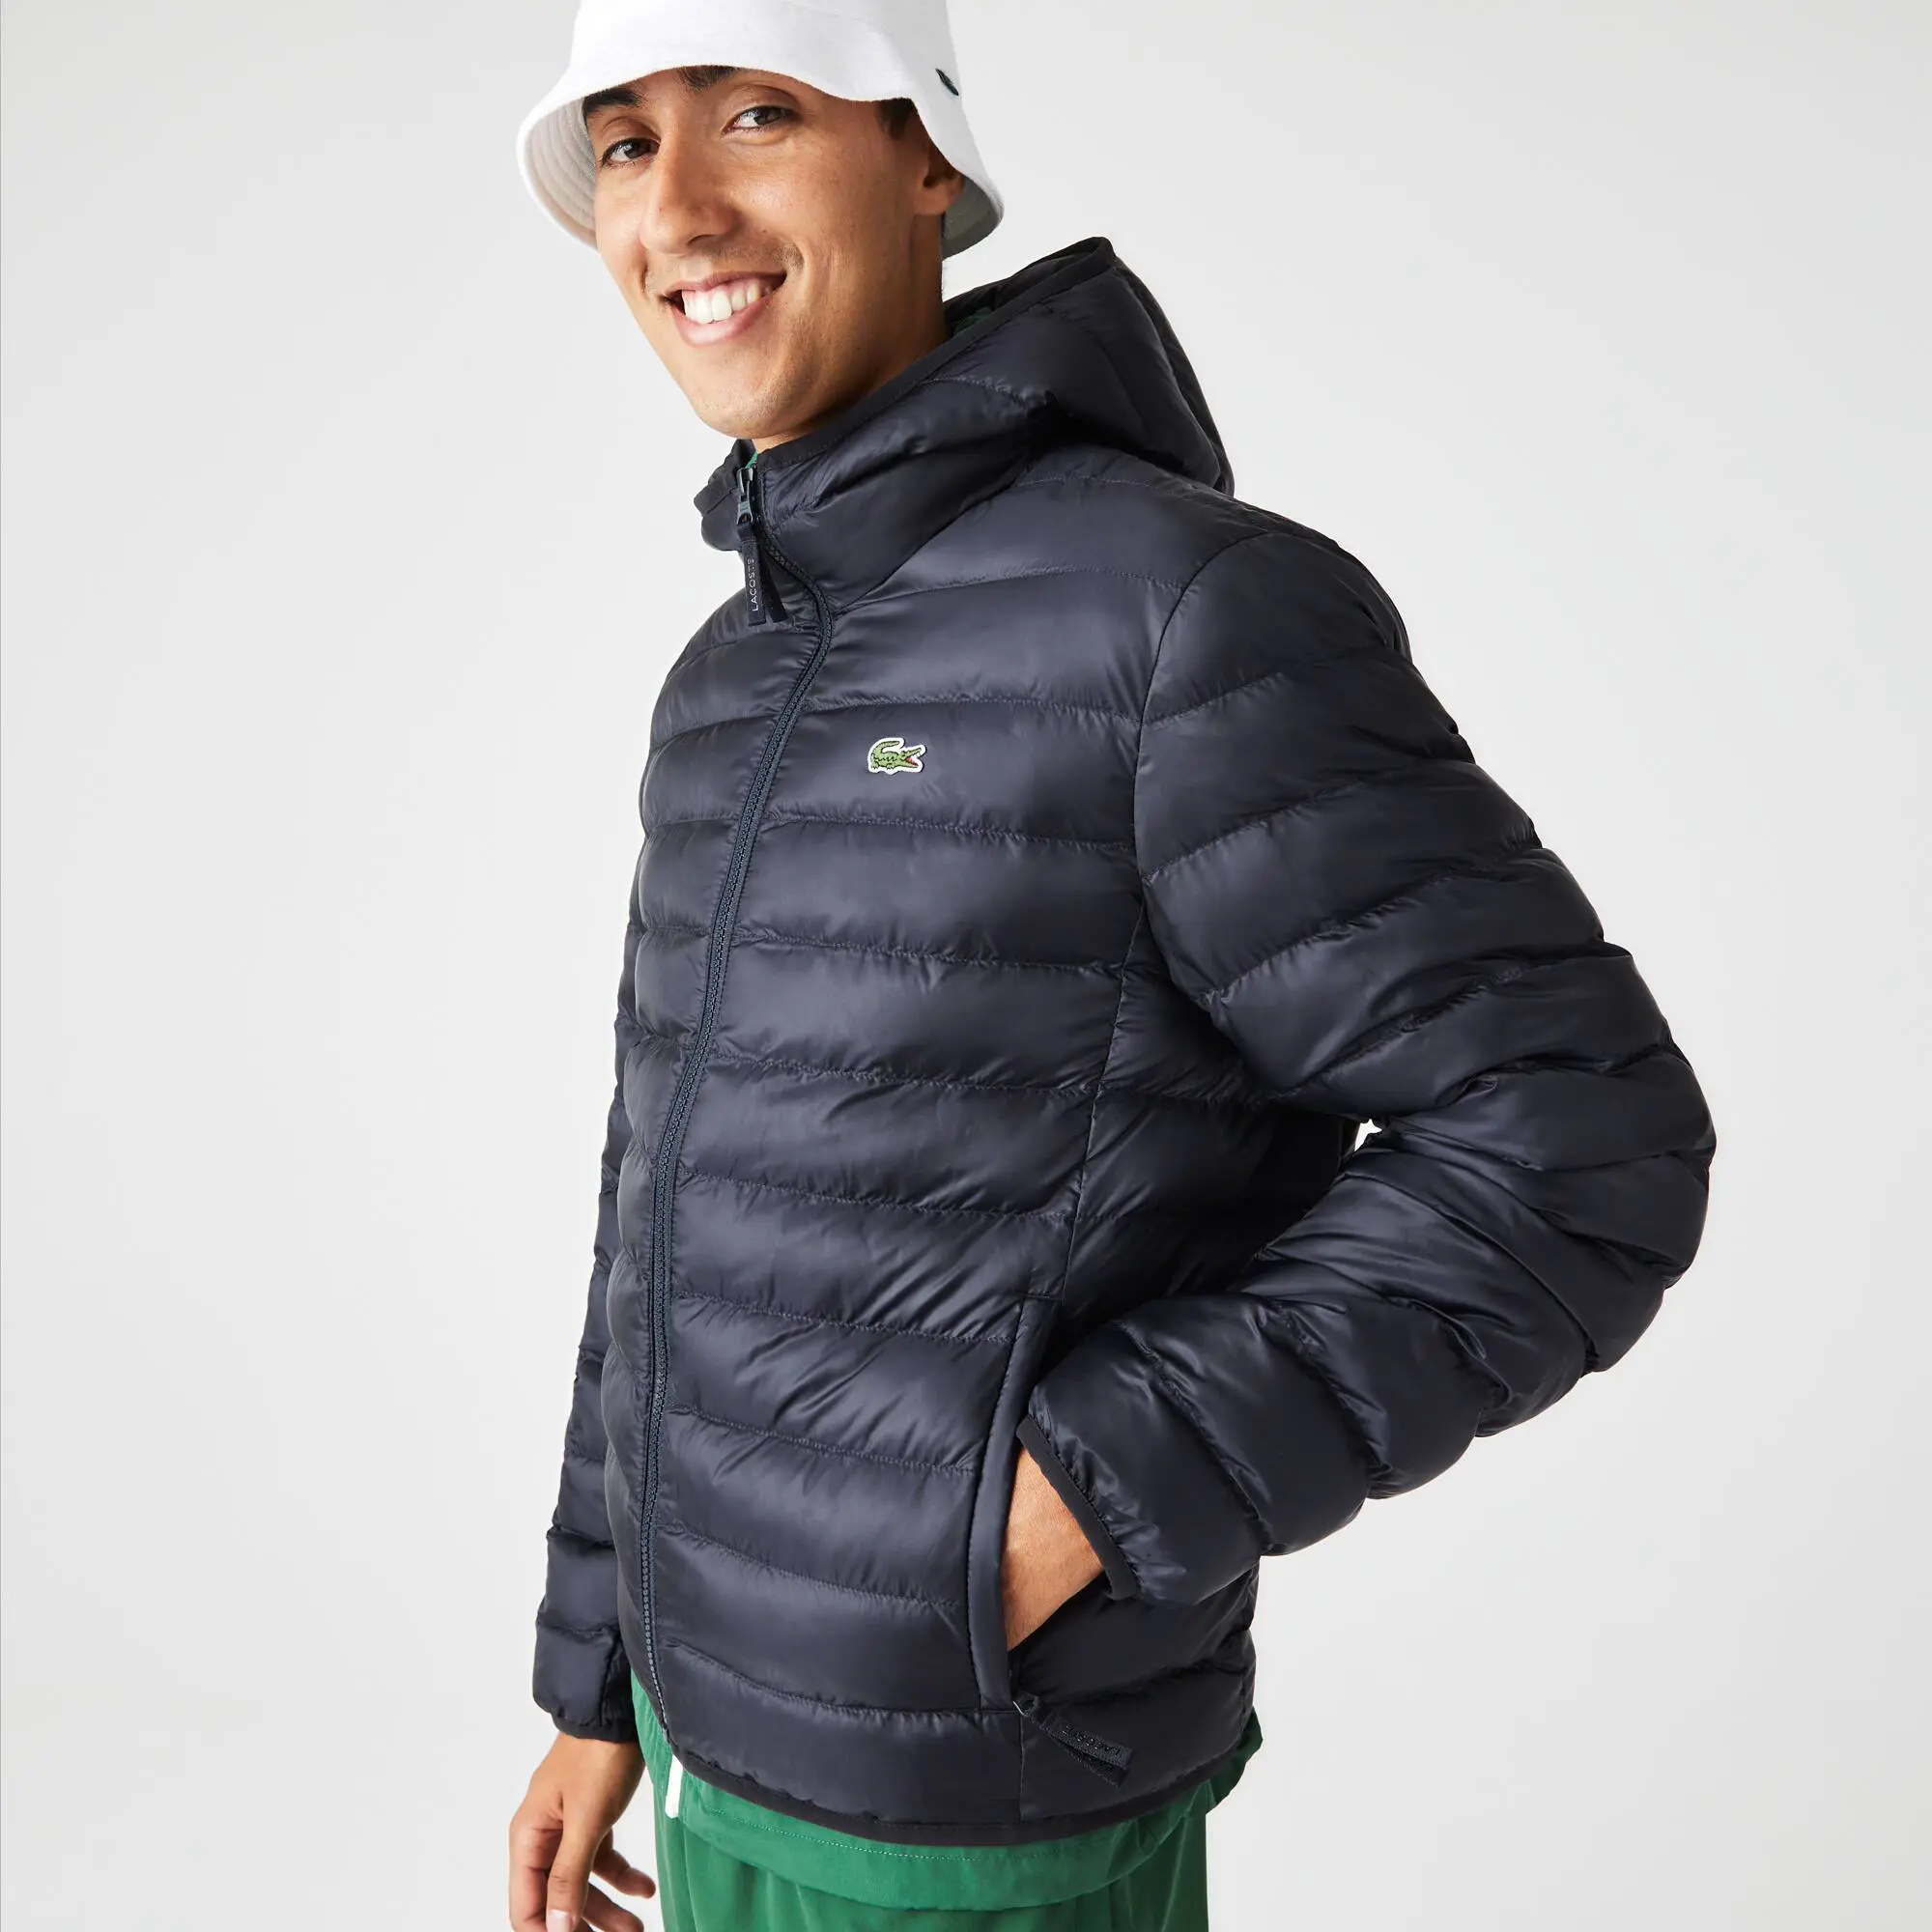 Lacoste Men's Quilted Jacket. 1